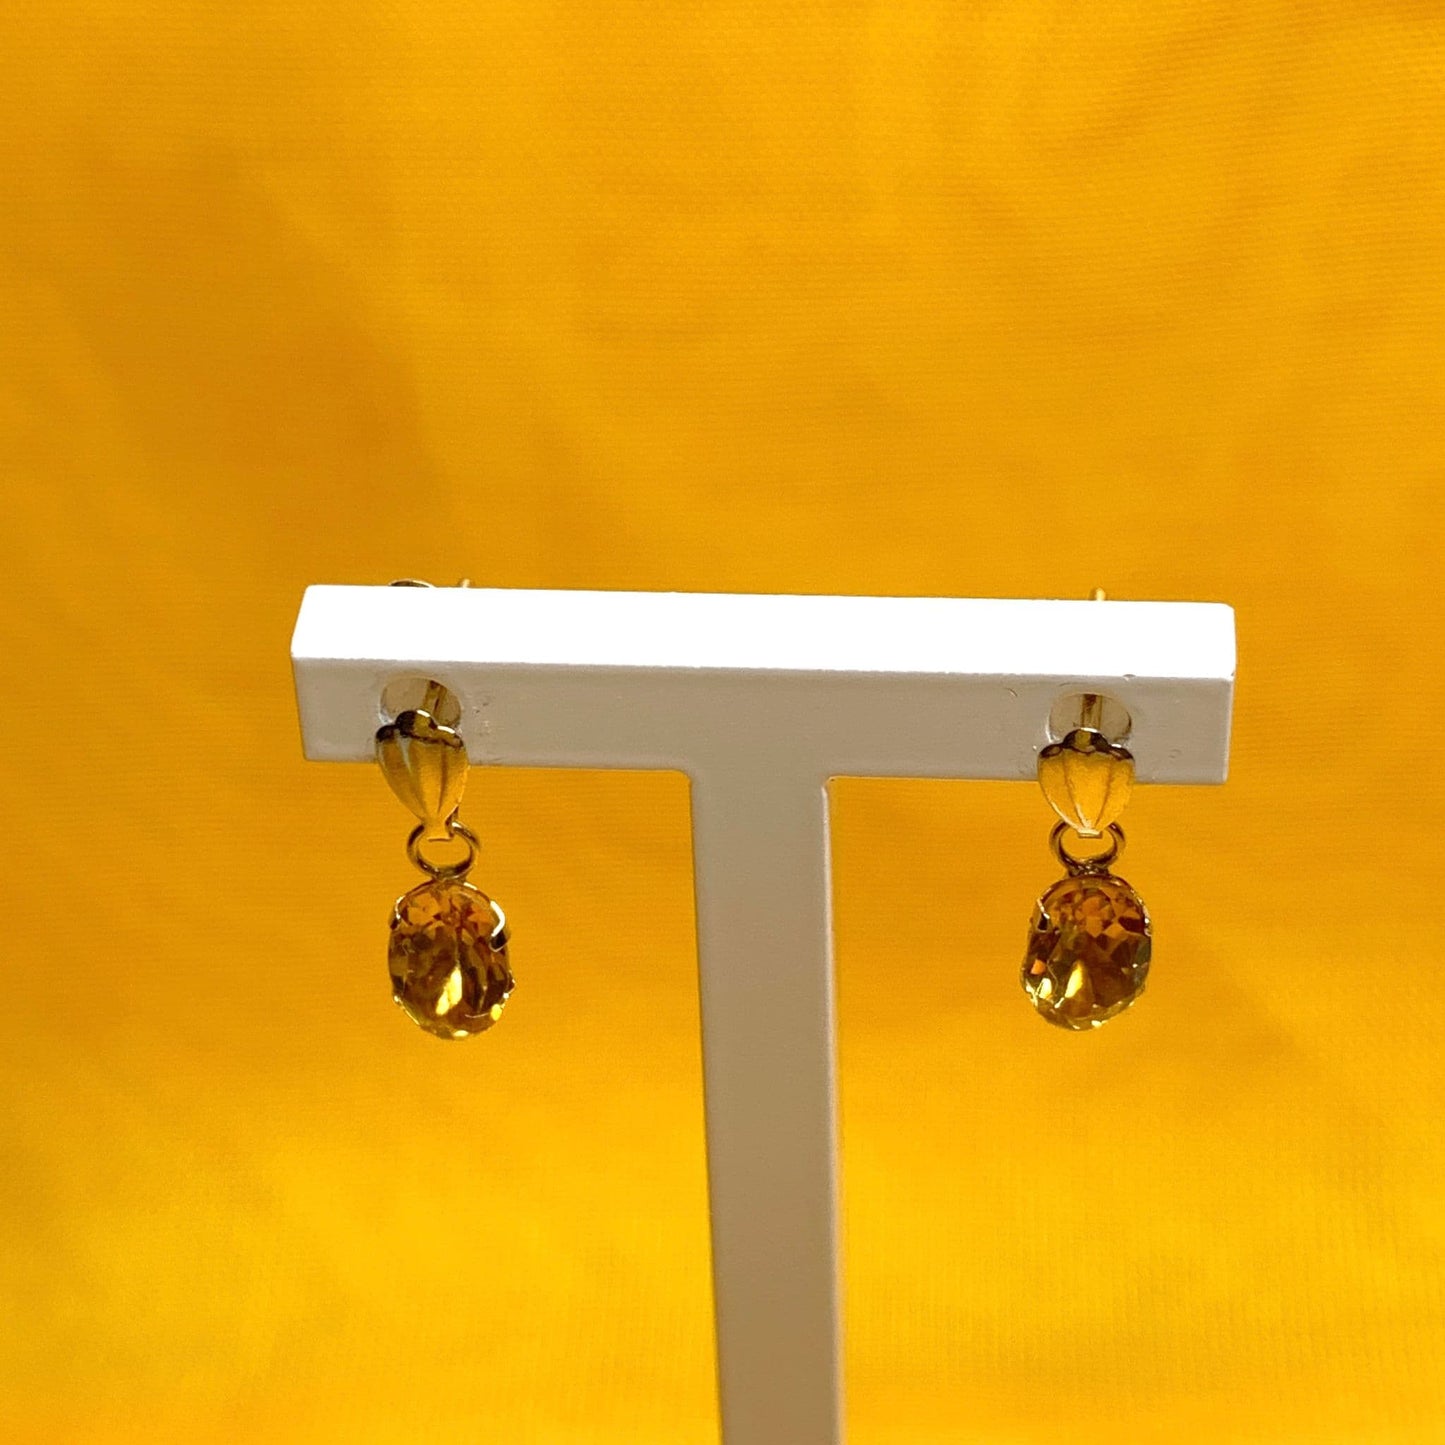 Oval shaped citrine yellow gold earrings